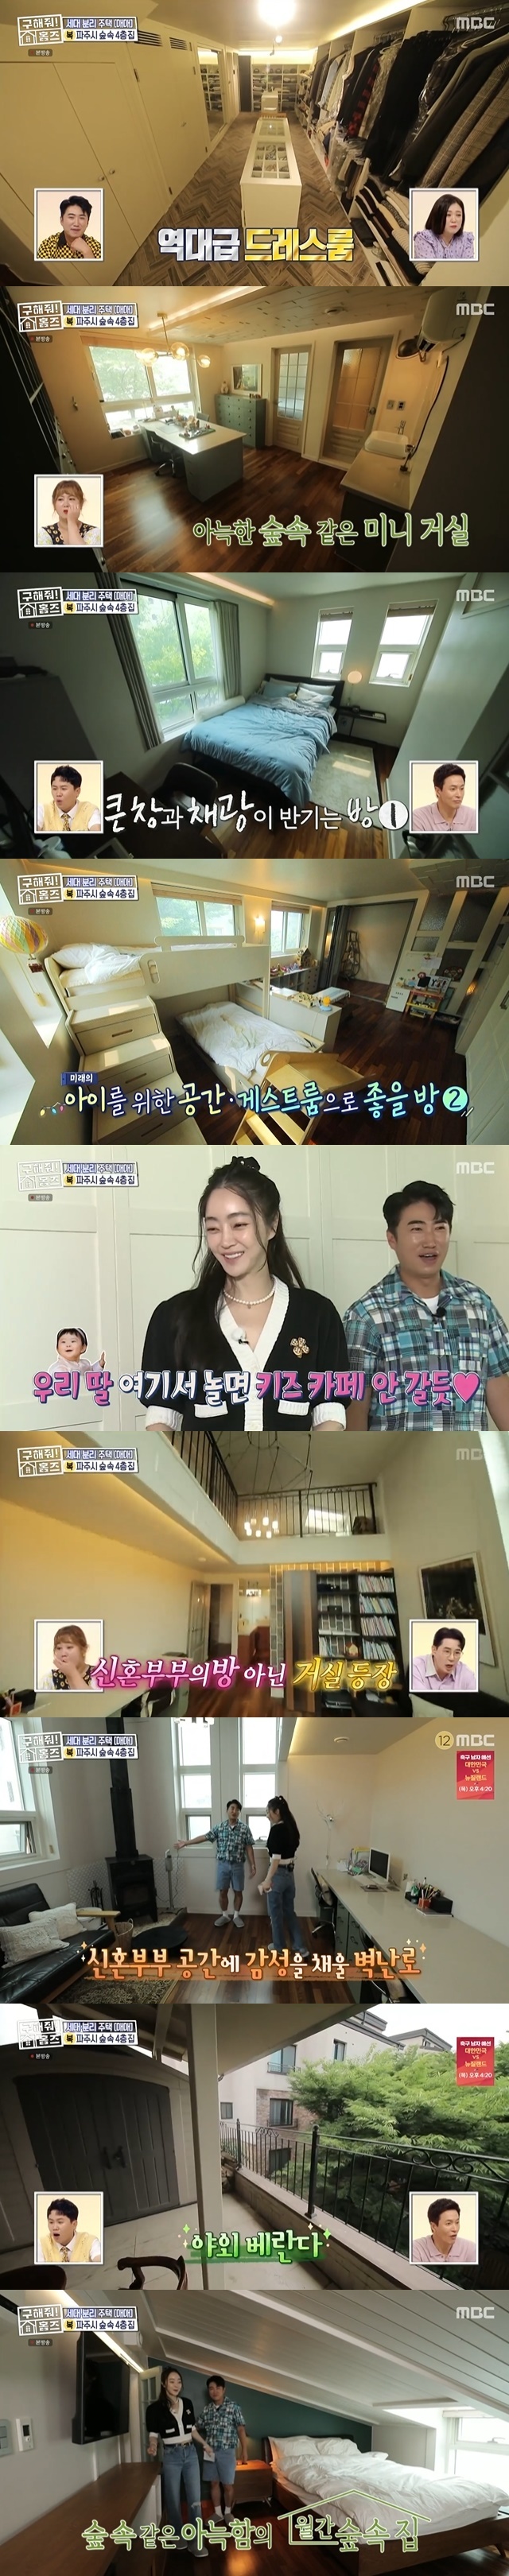 Kim Soo-mi Daughter-in-law Seo Hyo-rim was also introduced to the four-story house in the forest.MBC entertainment Where is My Home (hereinafter referred to as Homes), which was broadcast on July 18, featured a newlywed couple, The Client, who visited three or more single-family houses or town houses to live with their mother-in-law.The Client hoped for a structure that could separate generations of Paju or Goyang city, and needed a garden with a garden and a space for couples only.The budget was 7-8 billion units for Marketing, and up to 900 million won for a good house that meets the conditions.Bok Tim Cody Seo Hyo-rim, Jang Dong-min headed to a fairytale village in Paju Opposition Party.There is an opposition station on the Gyeongui Central Line at 10 minutes walk, and this place, which has Unjeong Lake Park at 15 minutes walk, attracted attention because there was a Yarosu road where all the hot spots of the opposition party were gathered on foot.The neighborhood has been very favorable since the first impression.Especially, Seo Hyo-rim admired that Sumis mother would have liked it so much. Jang Dong-min said, The house full of attractive points.There is a forest-like space in front of my house, so the name of this house is Monthly Forest House. Deok Tim Lim Sung-bin also forgot to compete for a while and said, It does not seem to be our country.I think Im on a trip, he said.The interior of the house was a skip floor structure that climbed up and down half a floor, and there was a porch on the 1.5th floor.When you open the door directly from the front door, The Kitchen, a sensual interior that has completed the 2018 remodeling, appeared.Also inside The Kitchen was an outdoor terrace with folding doors.Seo Hyo-rim was absolutely infatuated with this house.Seo Hyo-rim noted that he was a privately coveted house and that I live alone Kyung Soo-jin chose a house from Save Me Homes.Seo Hyo-rim, like Kyung Soo-jin, expressed his desire directly and focused his attention, saying, If the Client does not have this house (I want to have it).In addition, the house had a unique charm on each floor, and the bright, spacious living room on the first floor had a dining room full of European Feelings in the folding door.The garden, which is an option for parasol sets, was also visible at a glance, and then, down to the 0.5th floor, a dress room with a laundry room and a bathroom of Feelings like a store was resilient.Later, on the second floor, a living room with a good mining room and a green custom room for the mother came out, and a space that can be used as a childrens playroom on the 2.5th floor.Seo Hyo-rim reiterated his house, saying, I think our Joey would really like it if he played here, I dont have to go to the kids cafe.